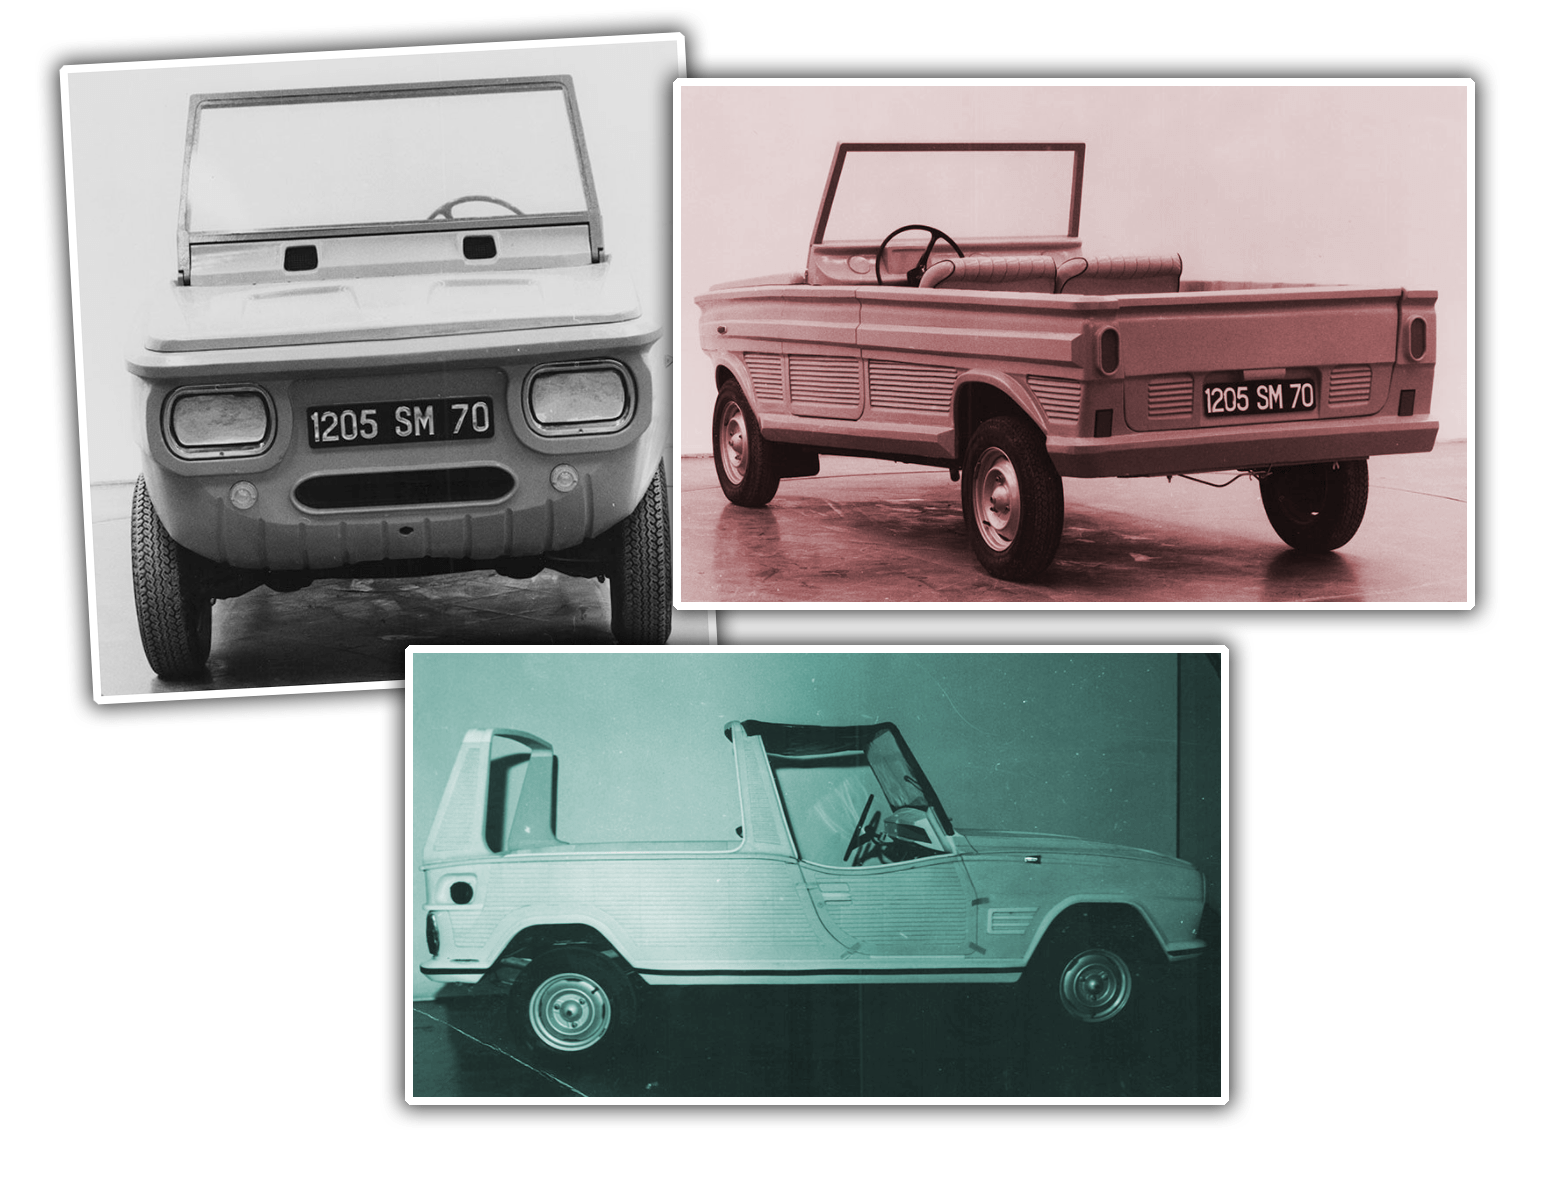 These Prototypes Of The Renault Rodéo Are Fascinating Industrial Design